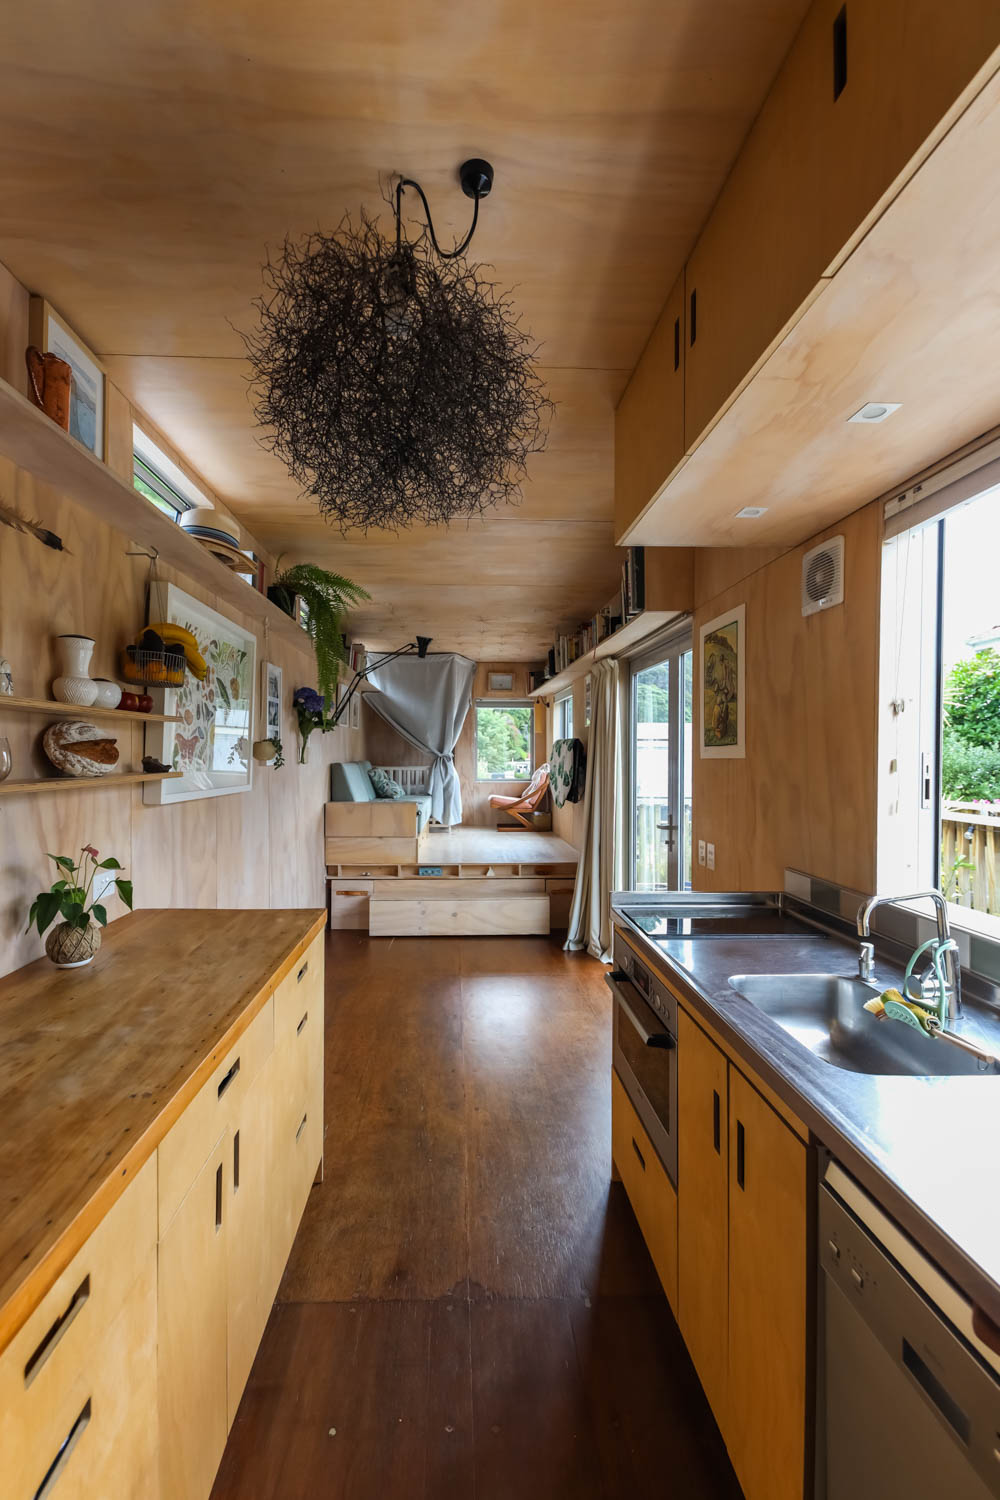 Living Big in a Tiny House - Incredible Shipping Container Home By The